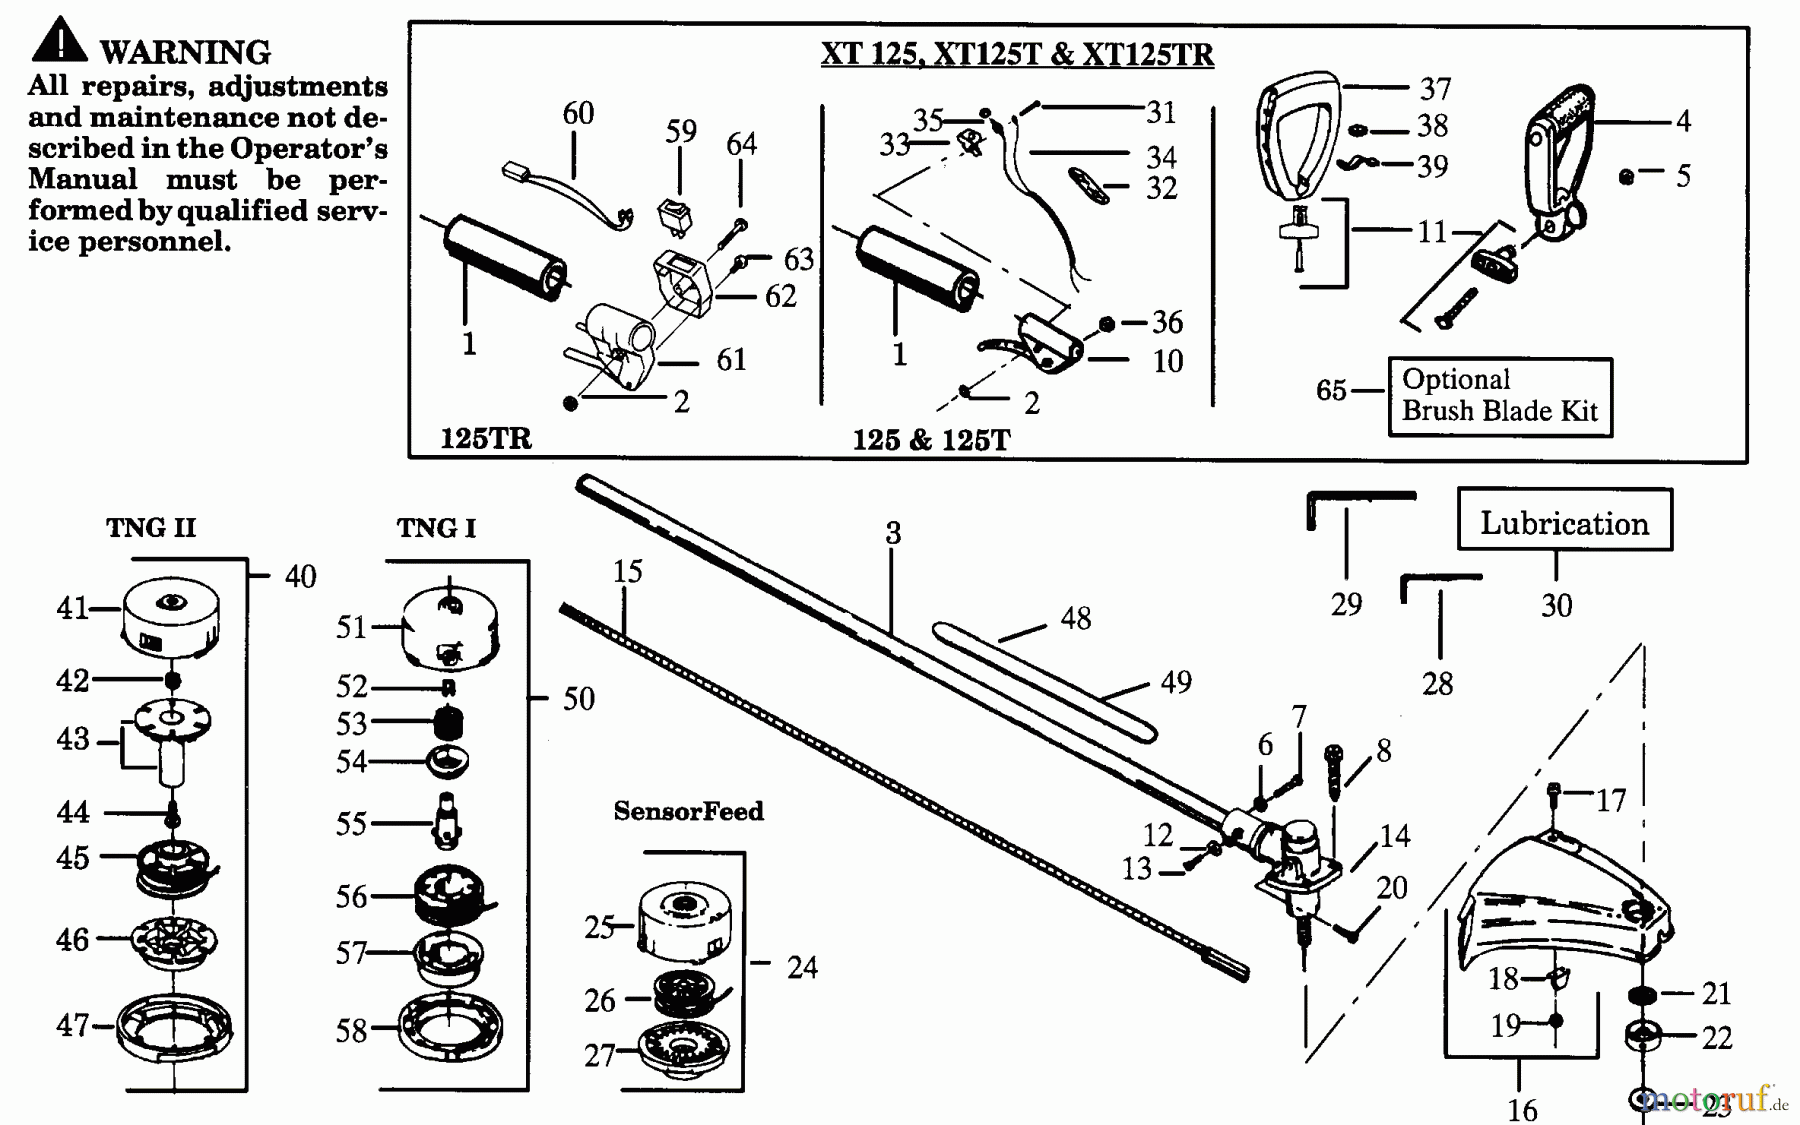  Poulan / Weed Eater Motorsensen, Trimmer XT125 - Weed Eater String Trimmer CUTTING HEAD & DRIVE SHAFT ASSEMBLY